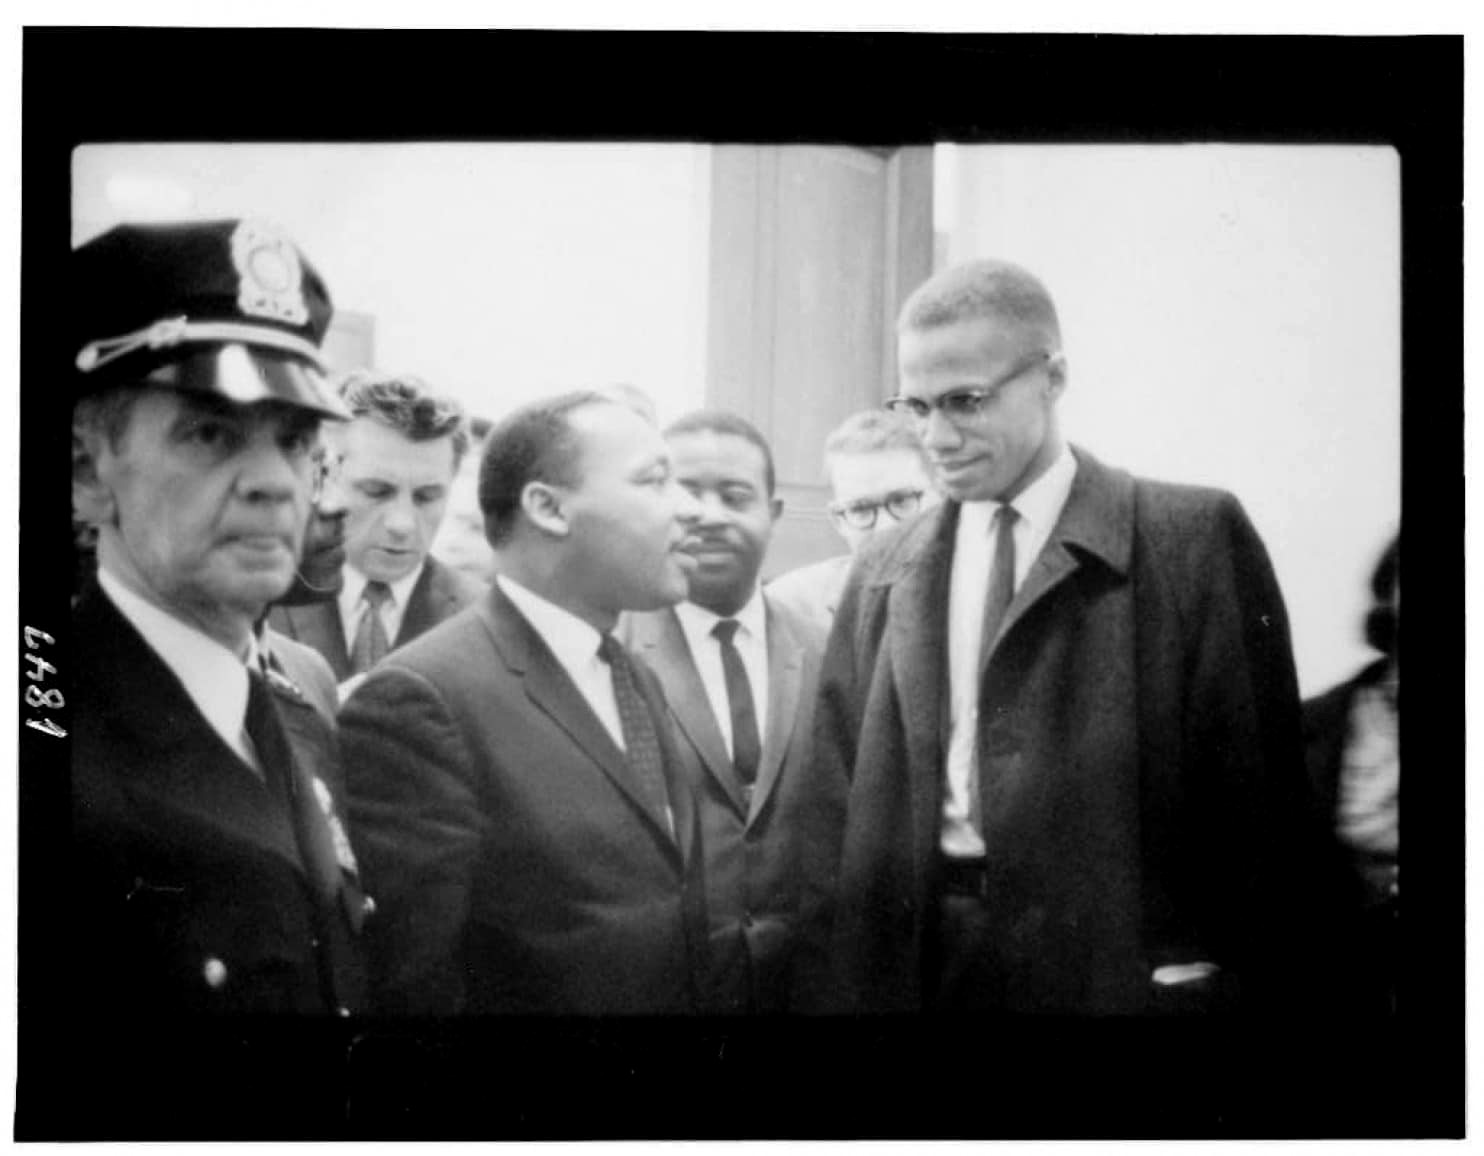 Martin Luther King Jr., Malcolm X, and exposing the lie about a feud